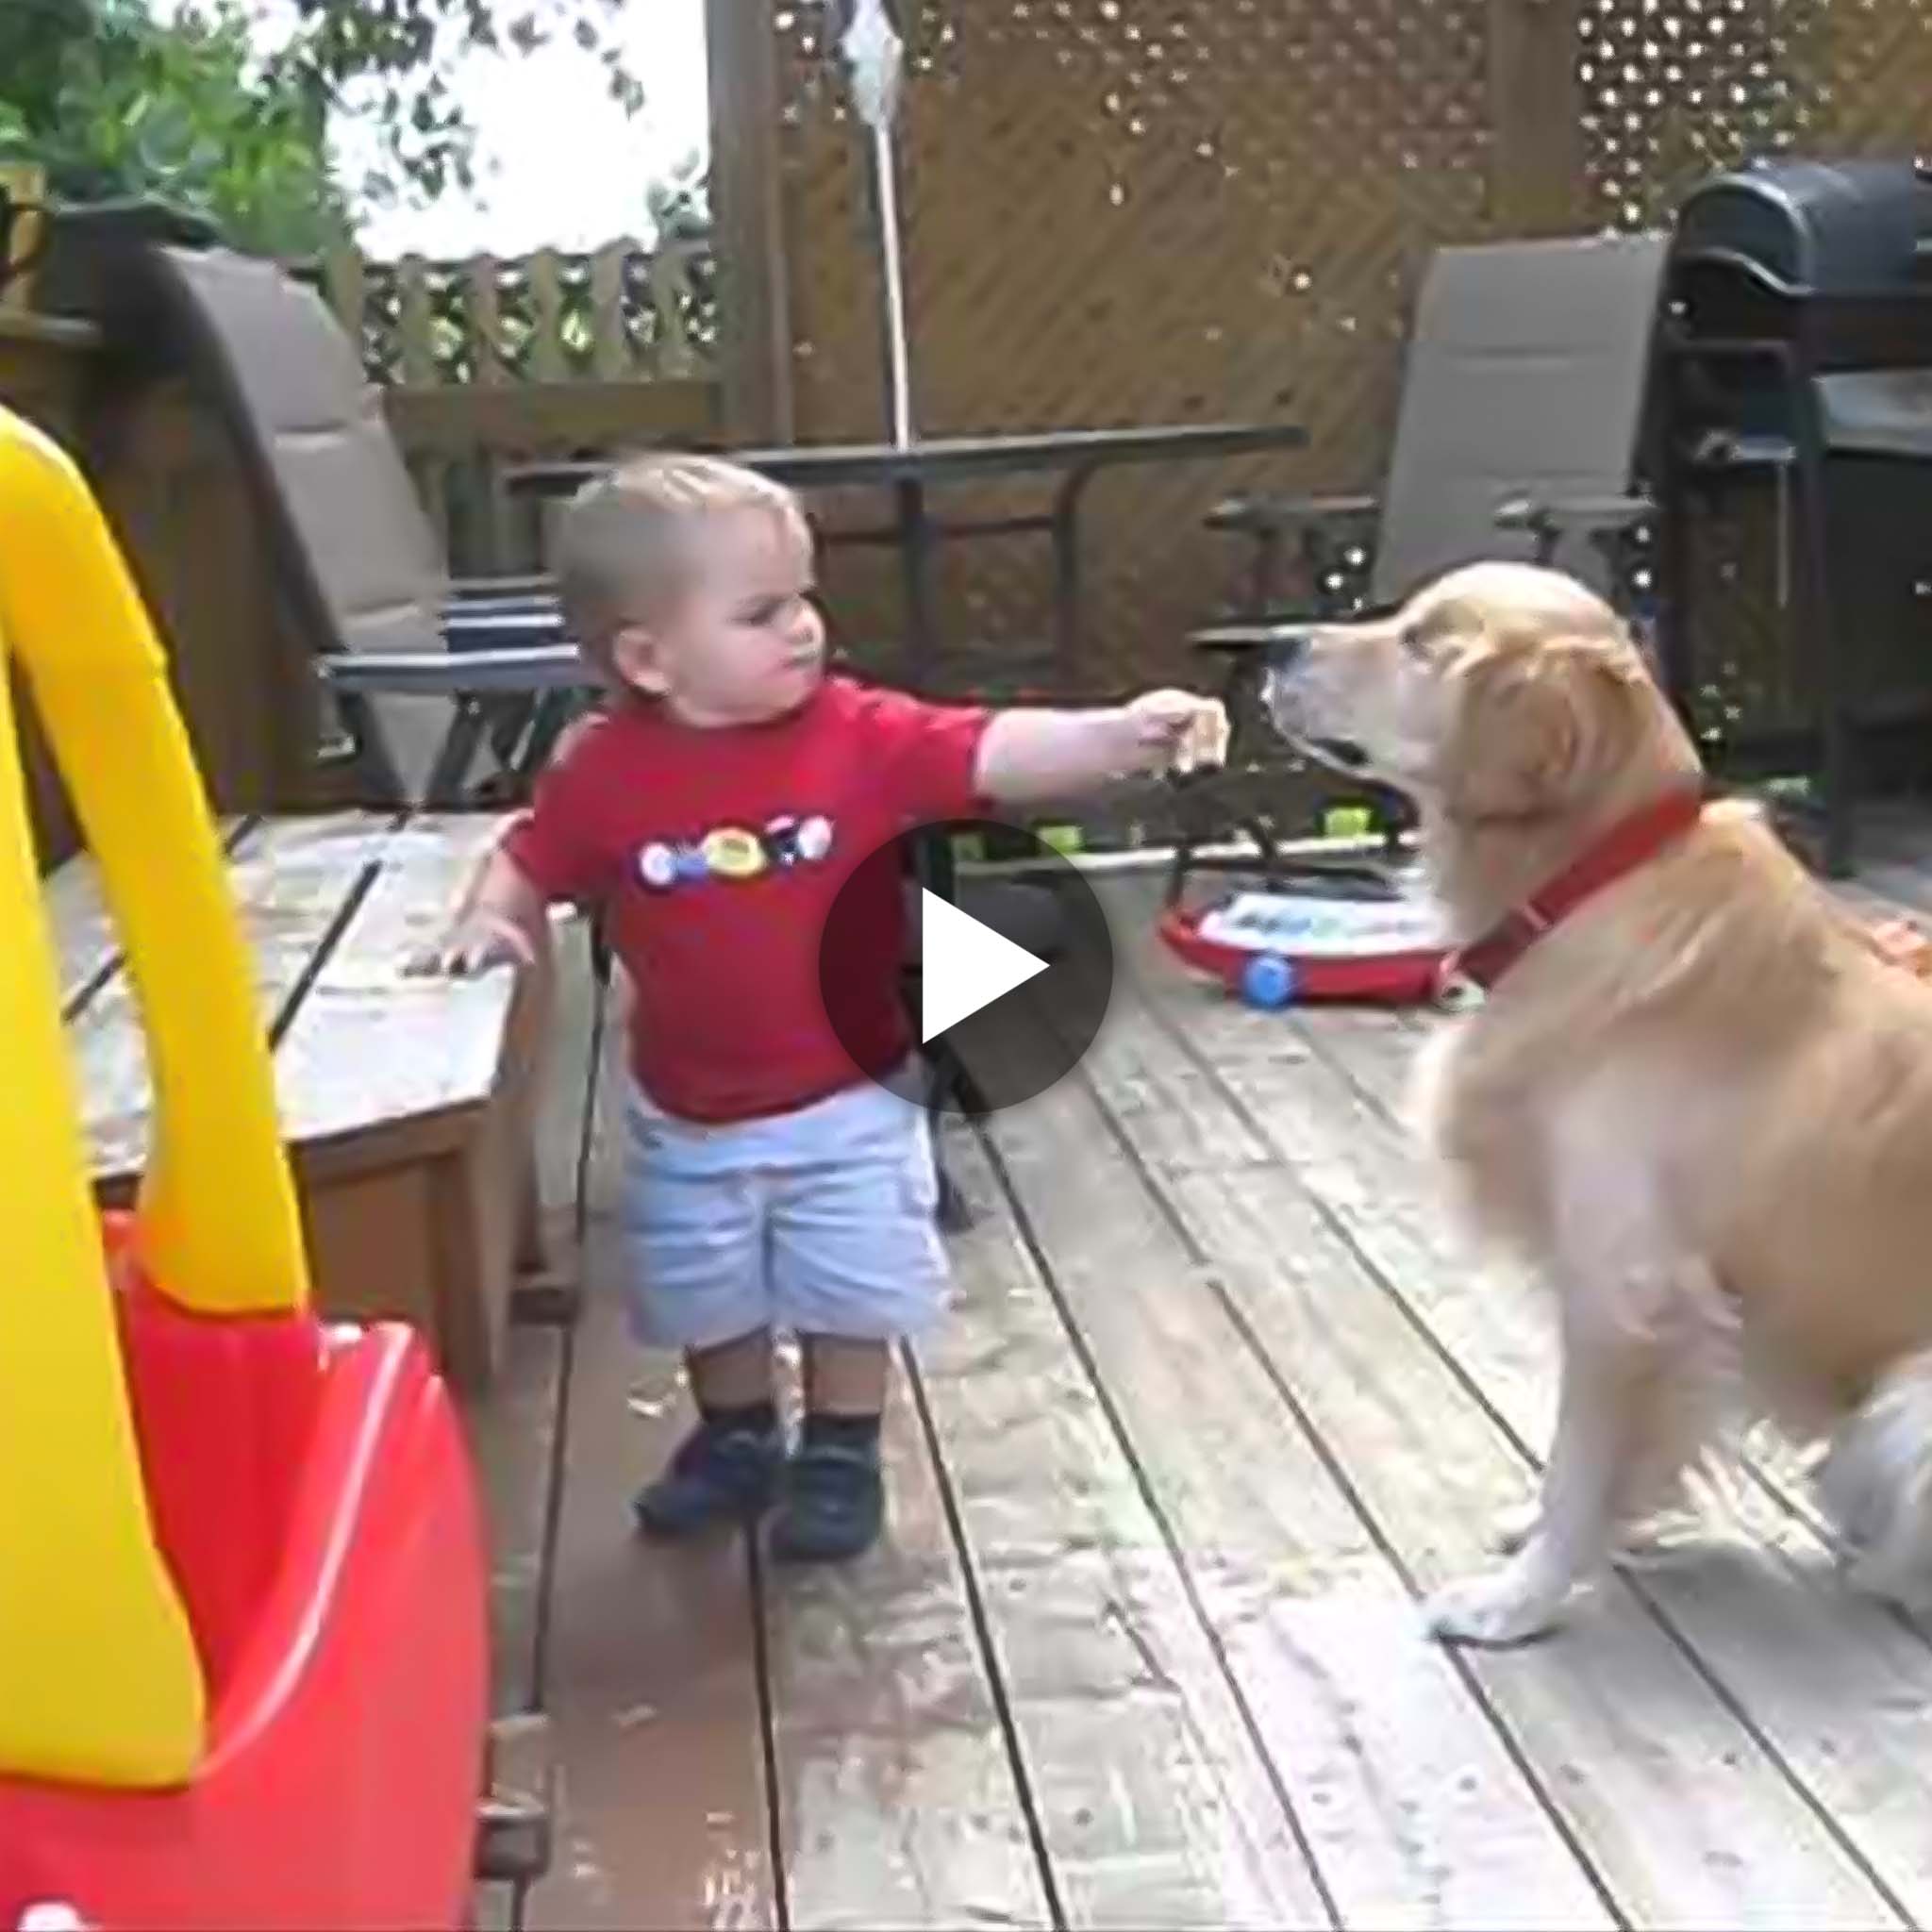 Sharing Love: Heartwarming Toddler’s Act of Kindness as He Shares Snacks with Visually Impaired Dog